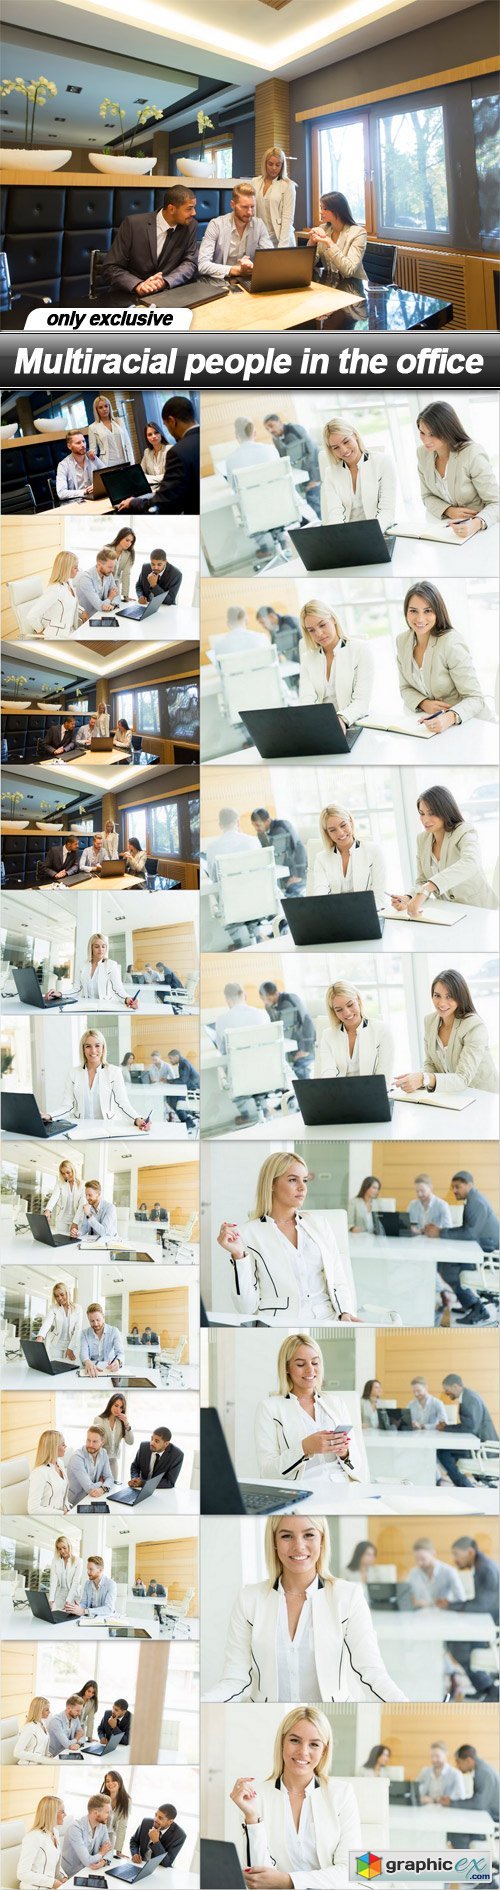 Multiracial people in the office - 20 UHQ JPEG